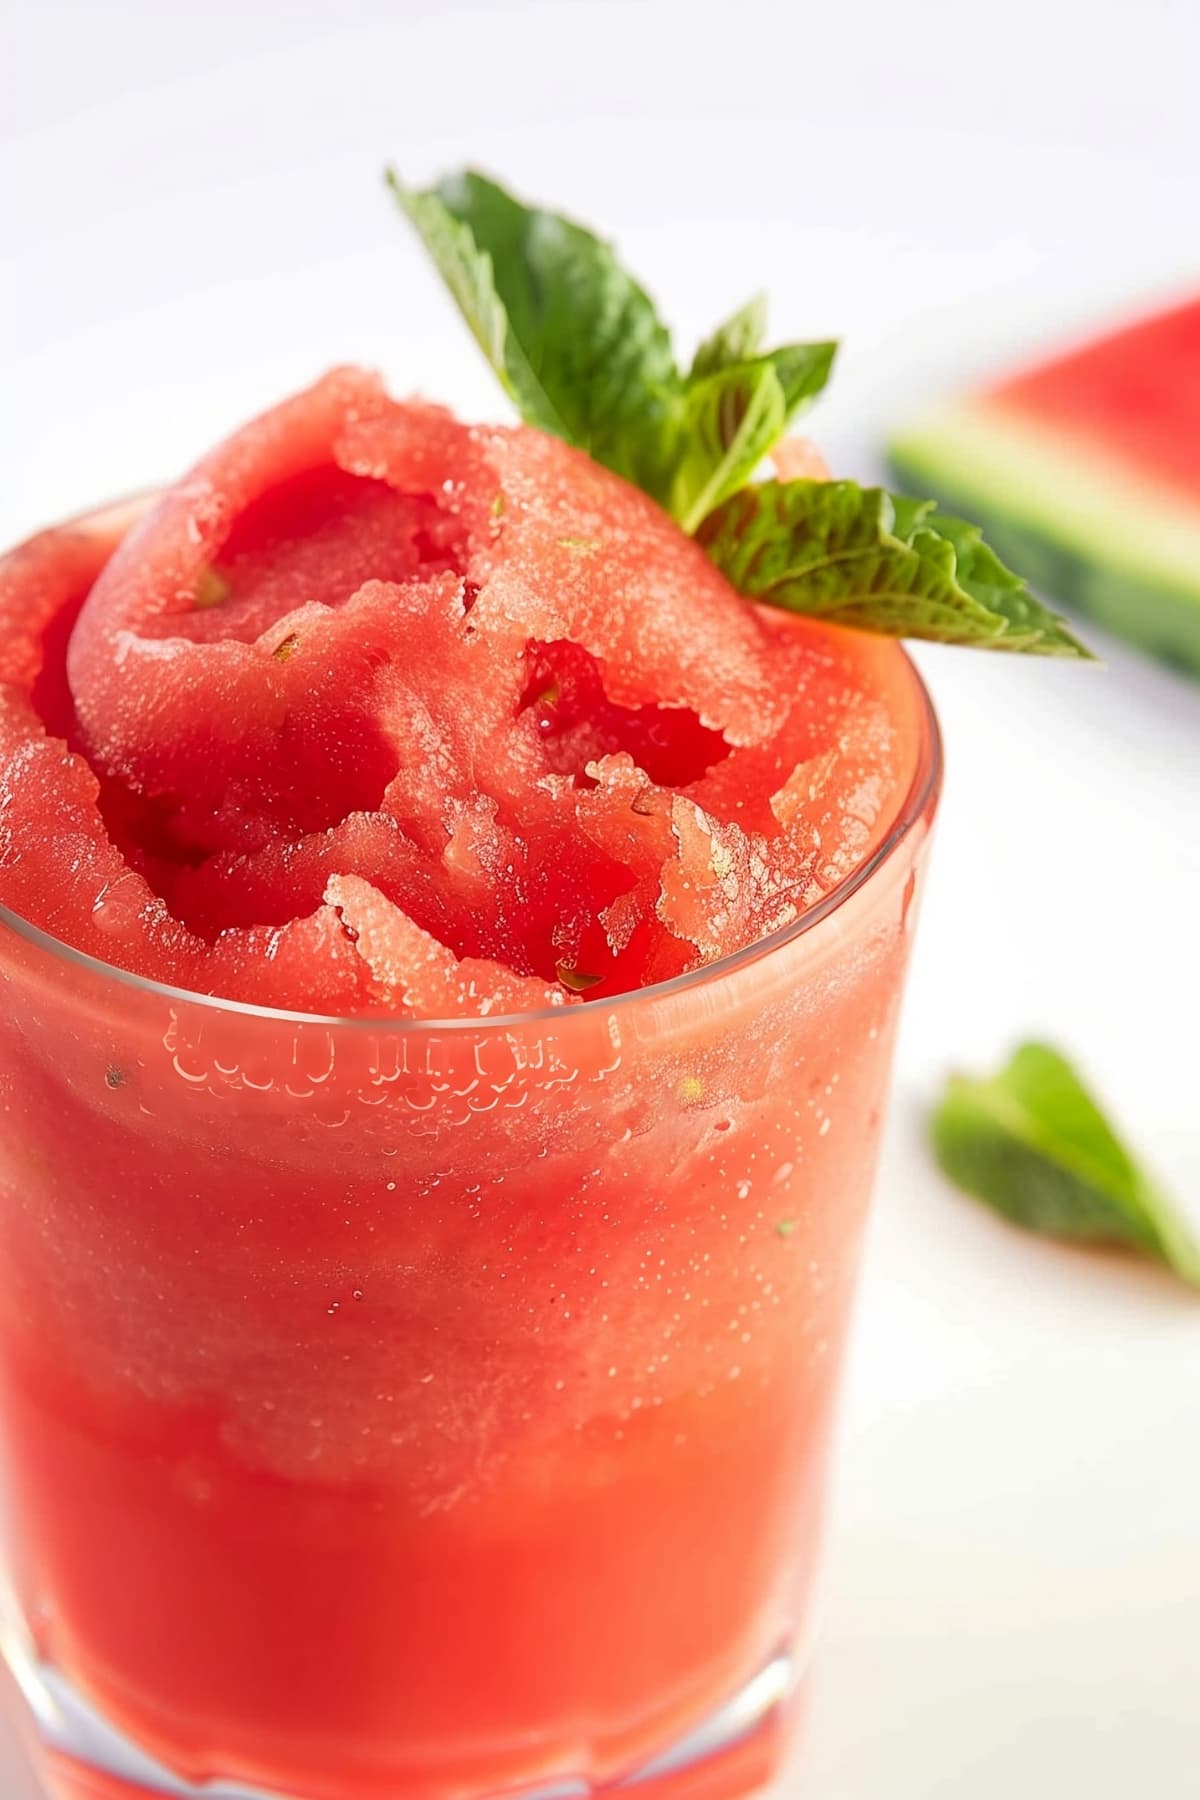 A glass of watermelon slushie topped with fresh mint leaves